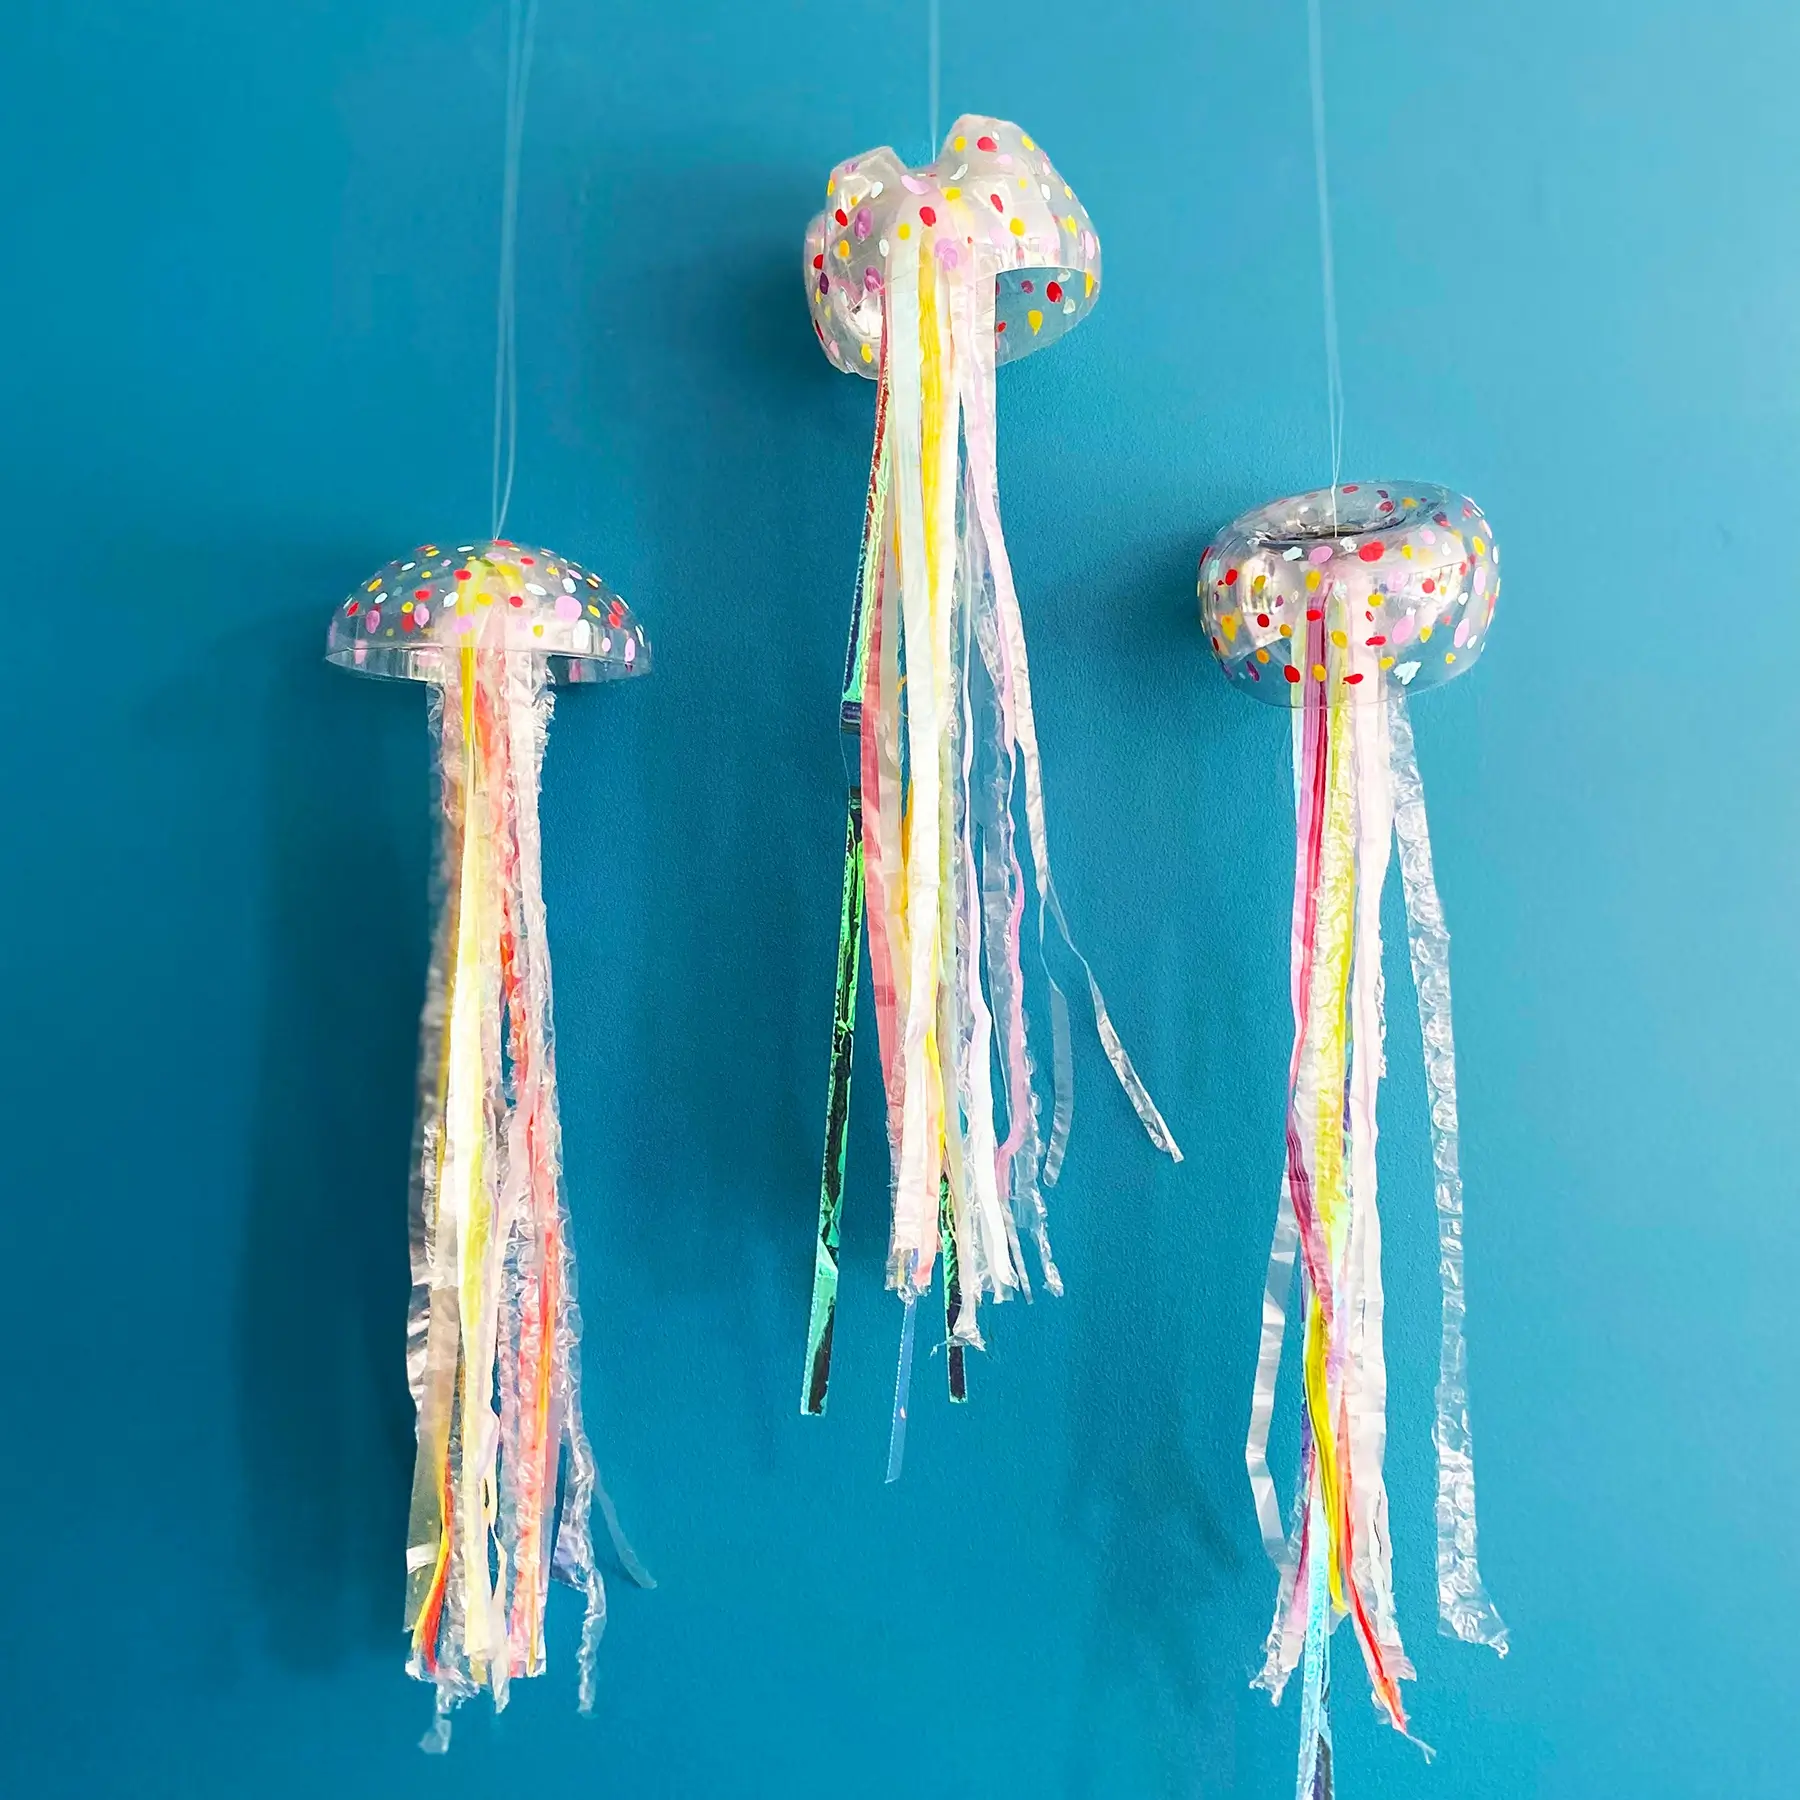 How To Make Jellyfish Mobile Craft Idea Out Of Cut Recycled Plastic Bottle